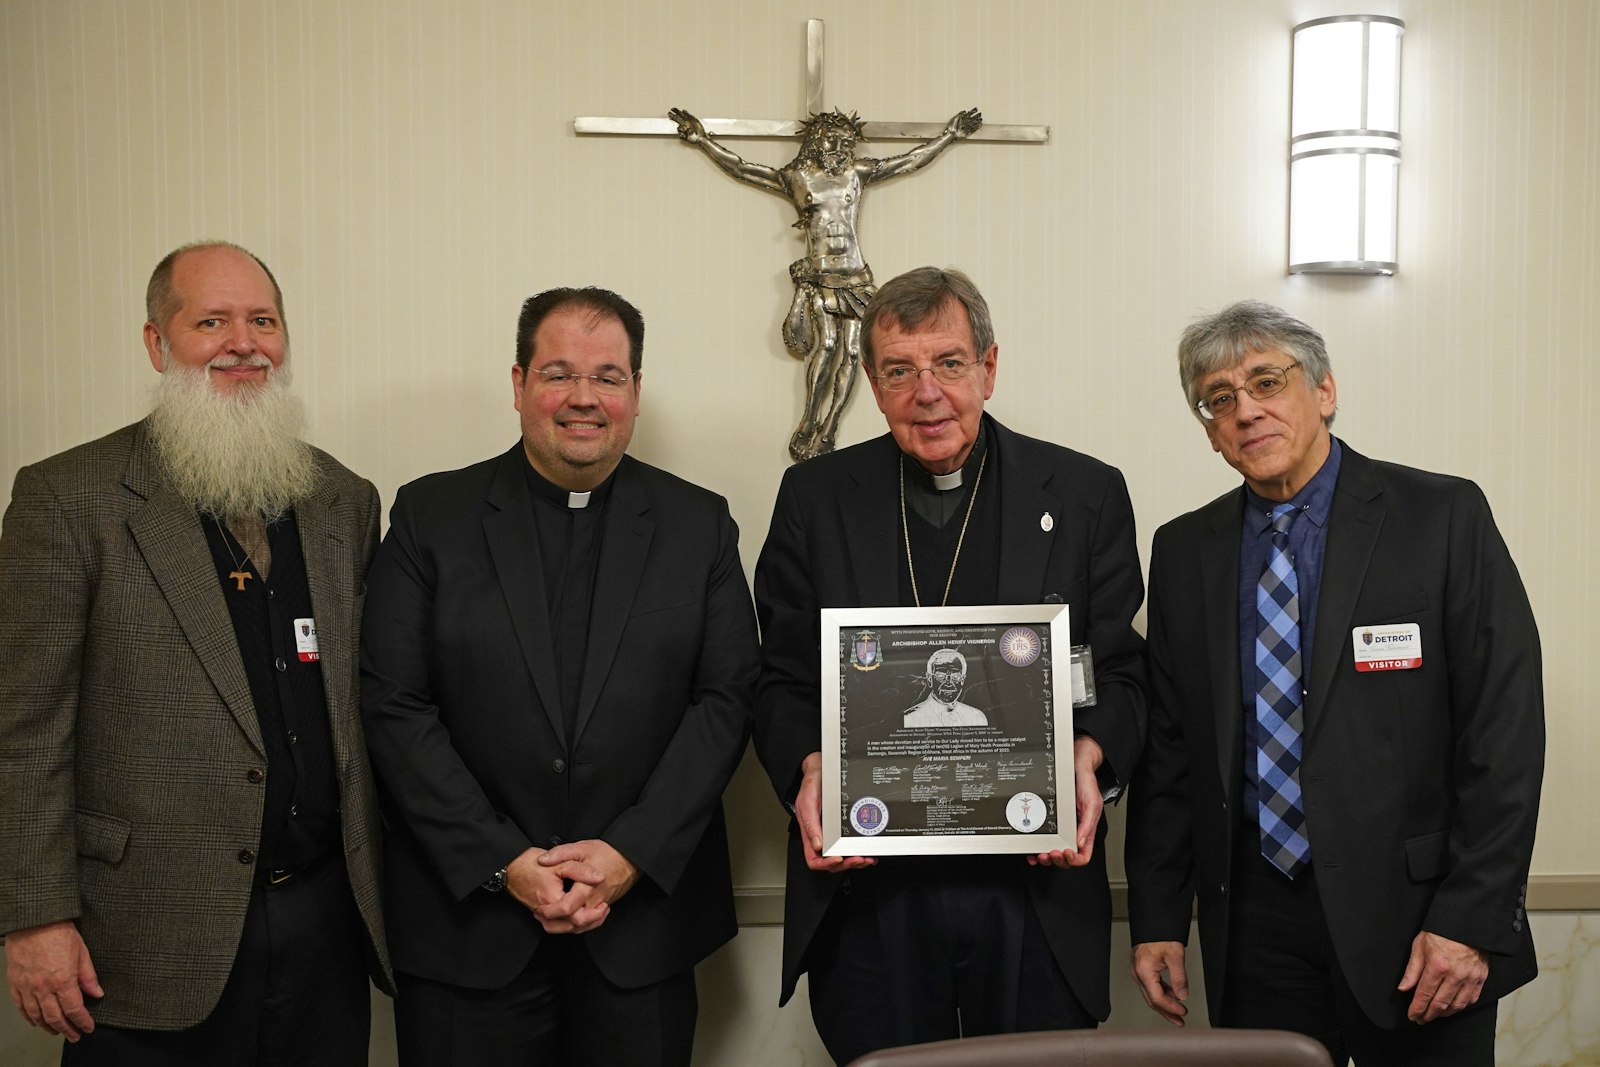 Detroit Archbishop Allen H. Vigneron accepts a gift from representatives of the Archdiocese of Detroit's Legion of Mary in gratitude for the archbishop's support of the apostolate's efforts to promote and foster the growth of several new Legion of Mary youth praesidia in Ghana. Pictured from left are Scott Cheney, president of the Detroit Regia of the Legion of Mary; Fr. Craig Marion; Archbishop Vigneron; and Steve Badalament, recent past president of the Detroit Regia. (Daniel Meloy | Detroit Catholic)